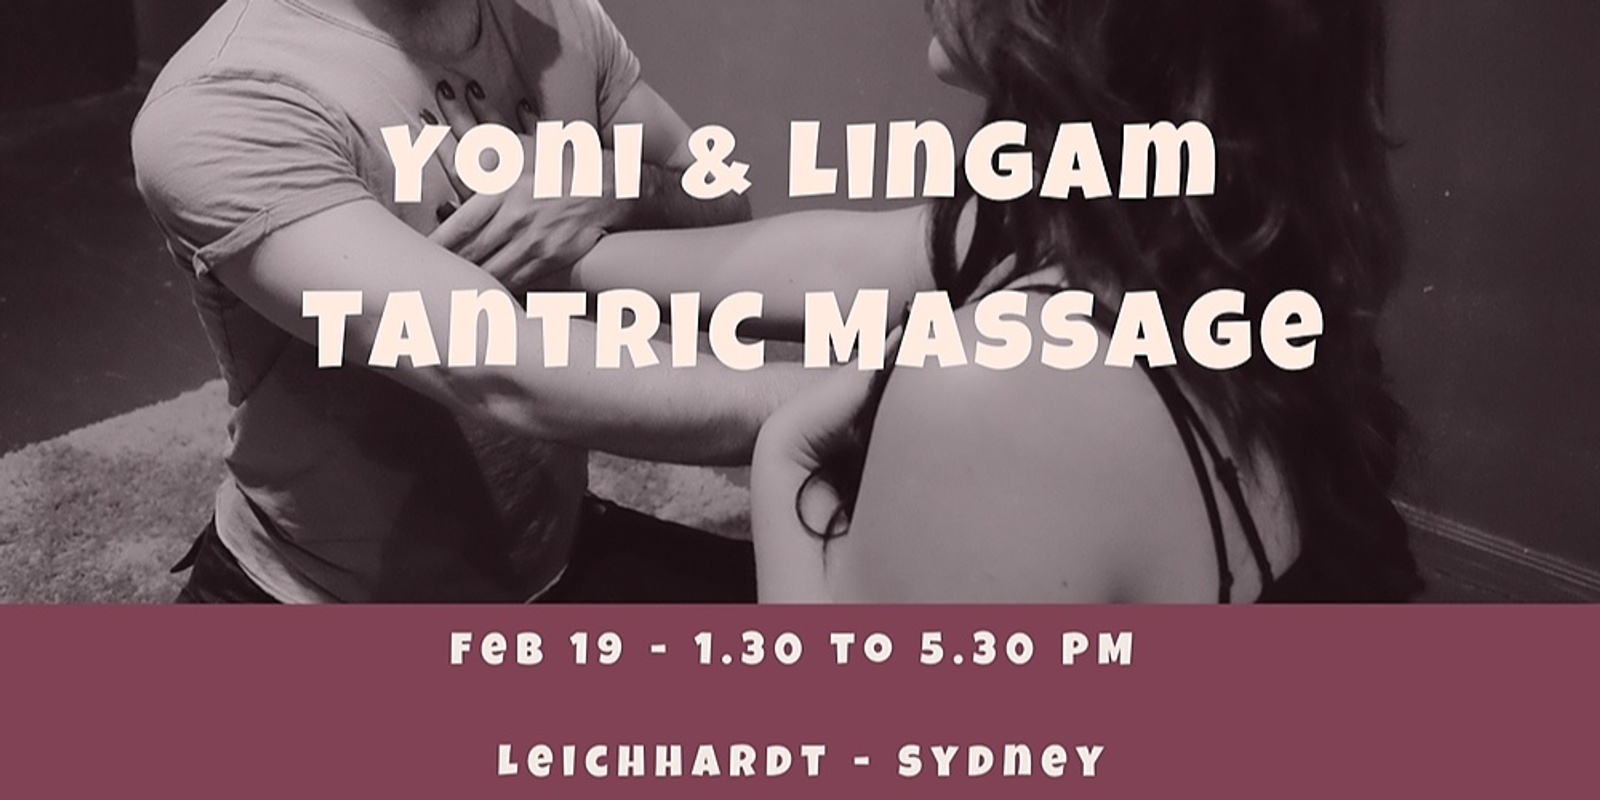 Best of Yoni and lingham massage